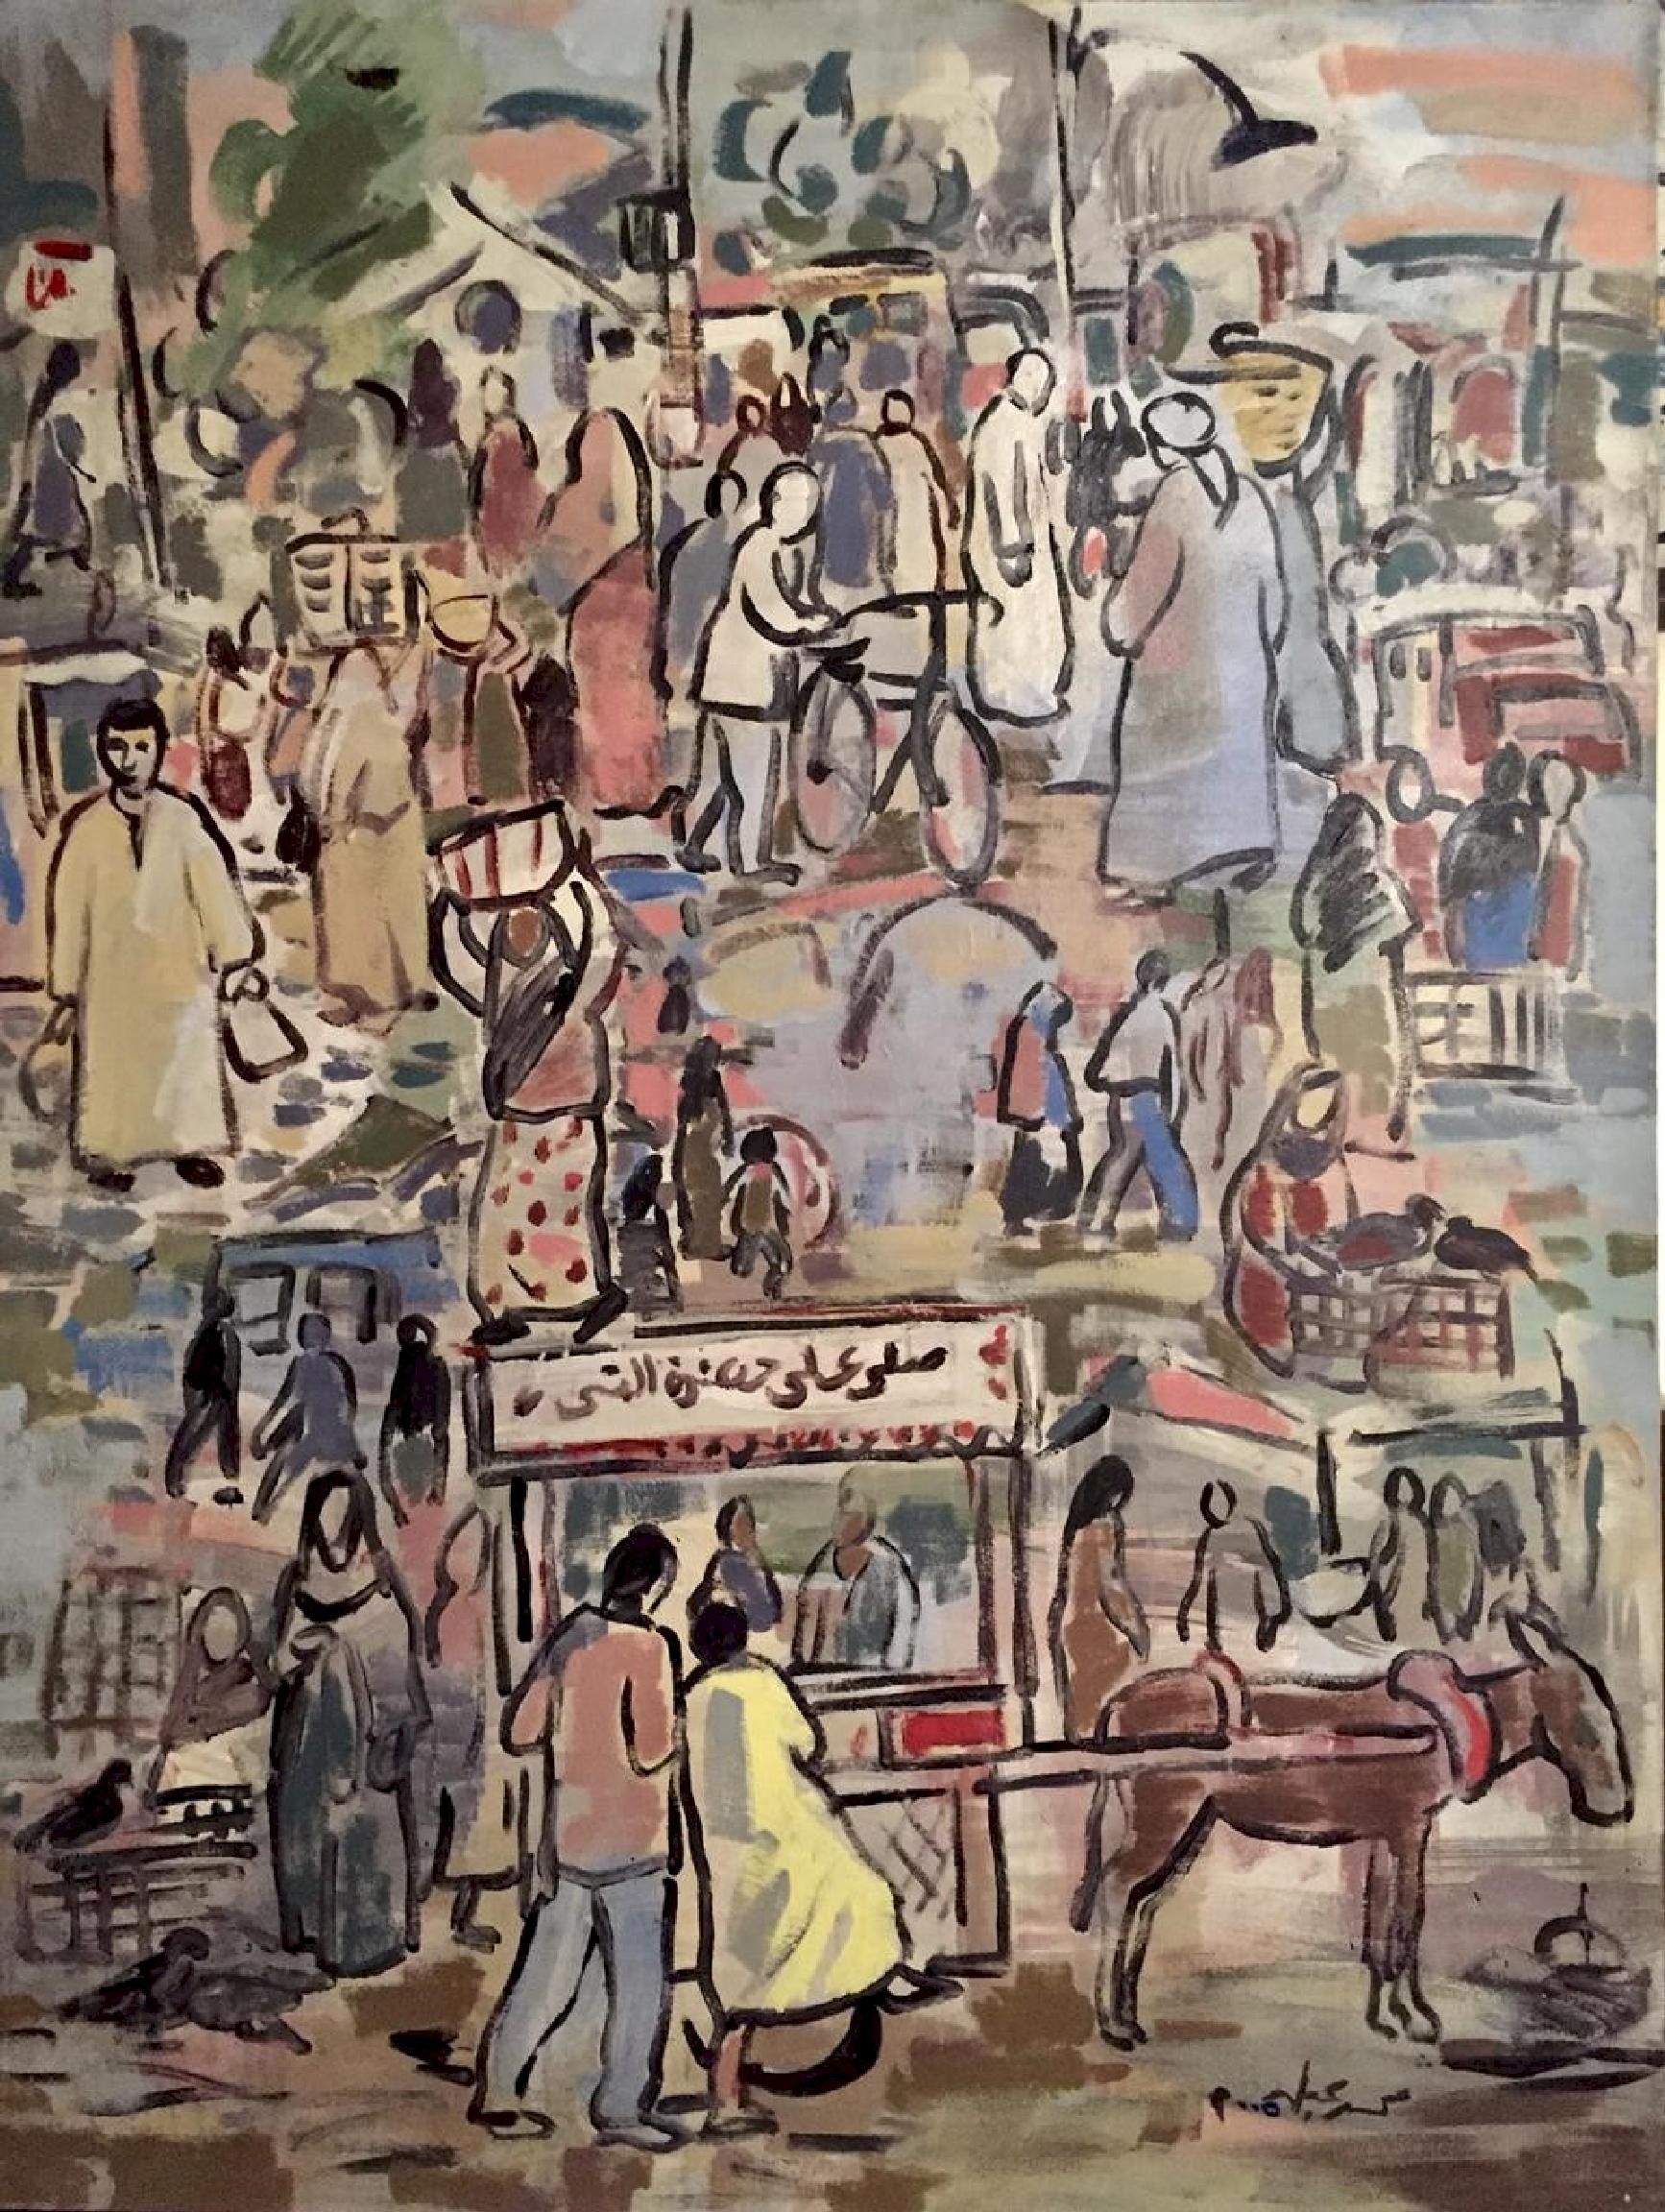 "The Cairo Market" Painting 51" x 43" inch by Mohamed Abla